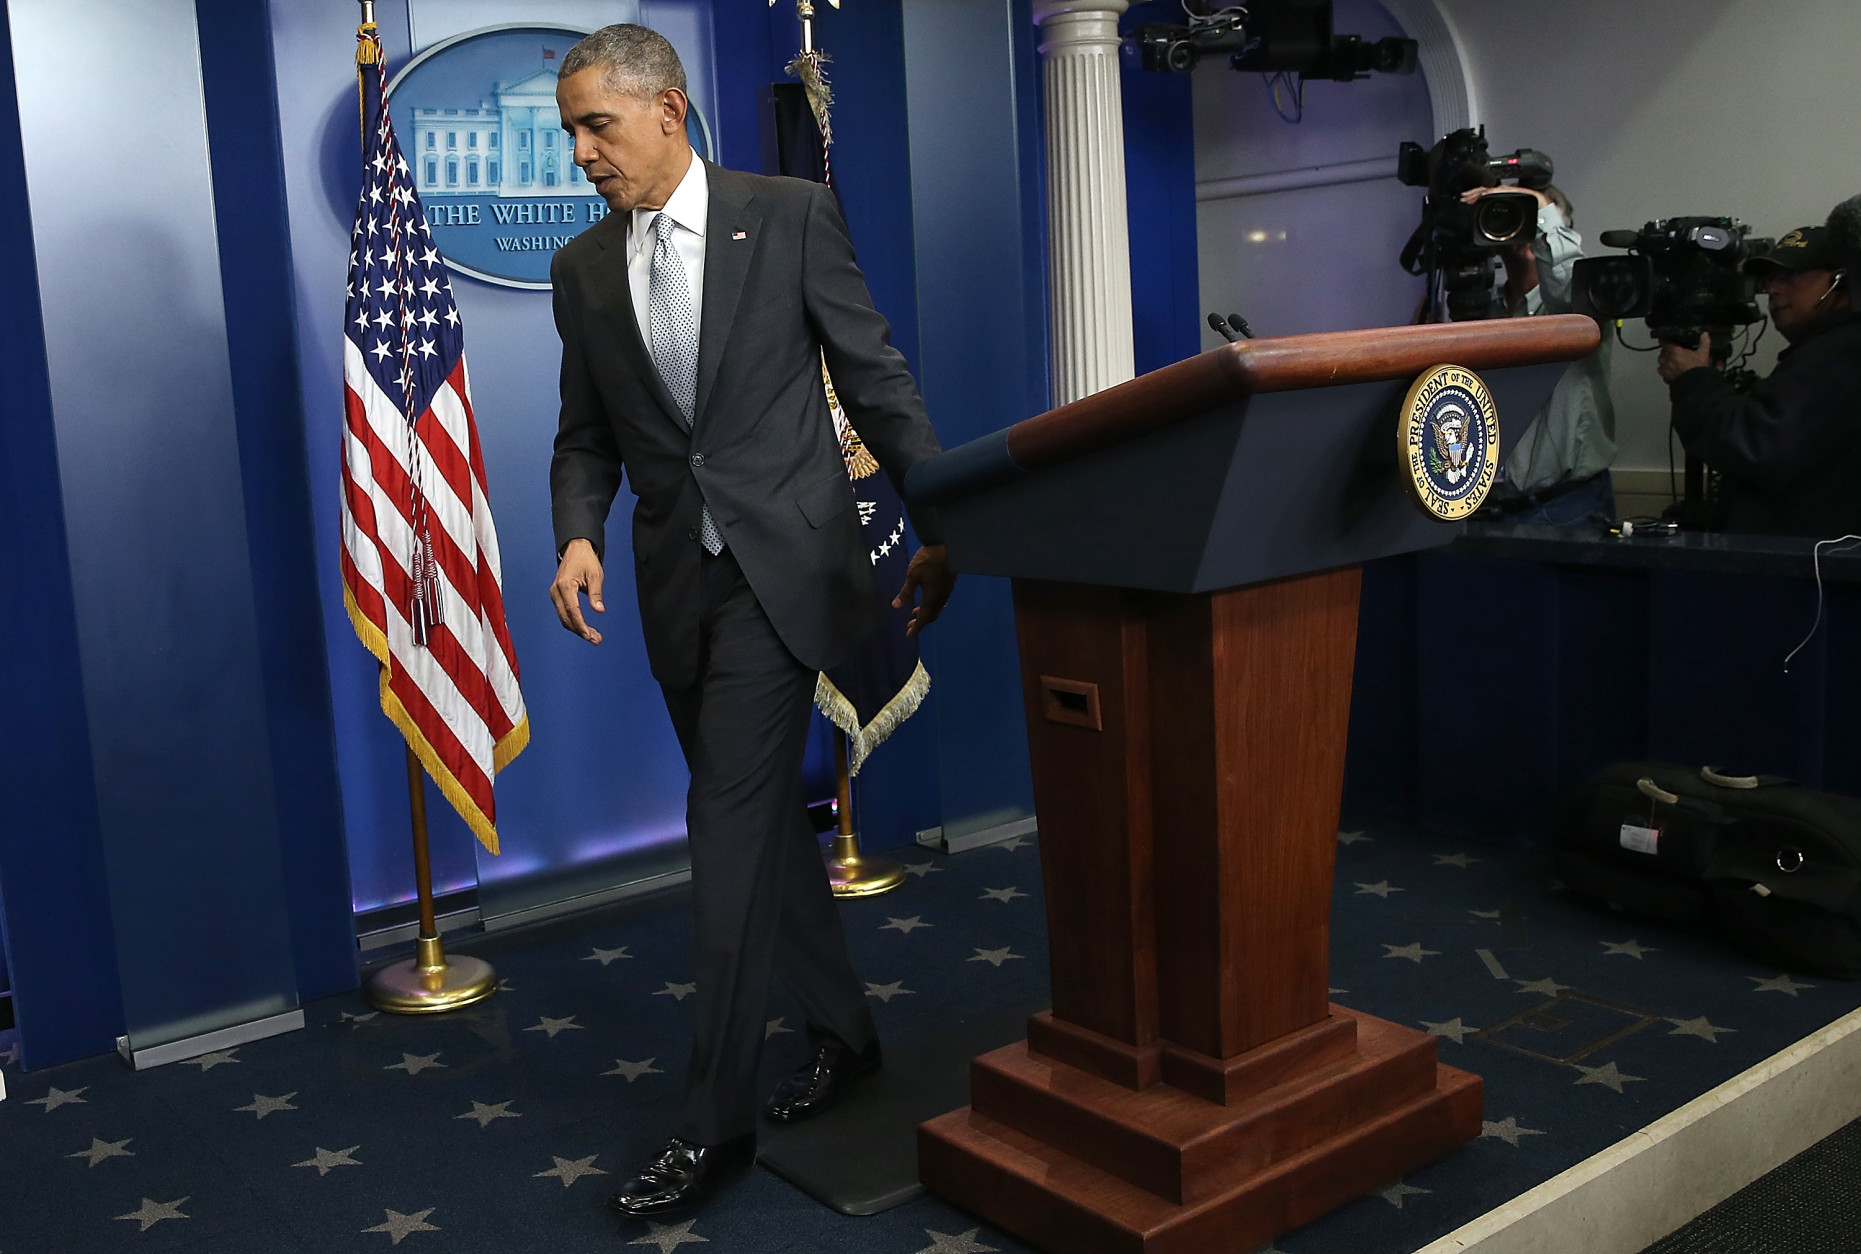 WASHINGTON, DC - NOVEMBER 13:  U.S. President Barack Obama departs the White House briefing room after delivering remarks on the recent violence taking place in Paris, France November 13, 2015 in Washington, DC. Gunfire and explosions erupted in the French capital with early casualty reports indicating at least 60 dead.  (Photo by Win McNamee/Getty Images)